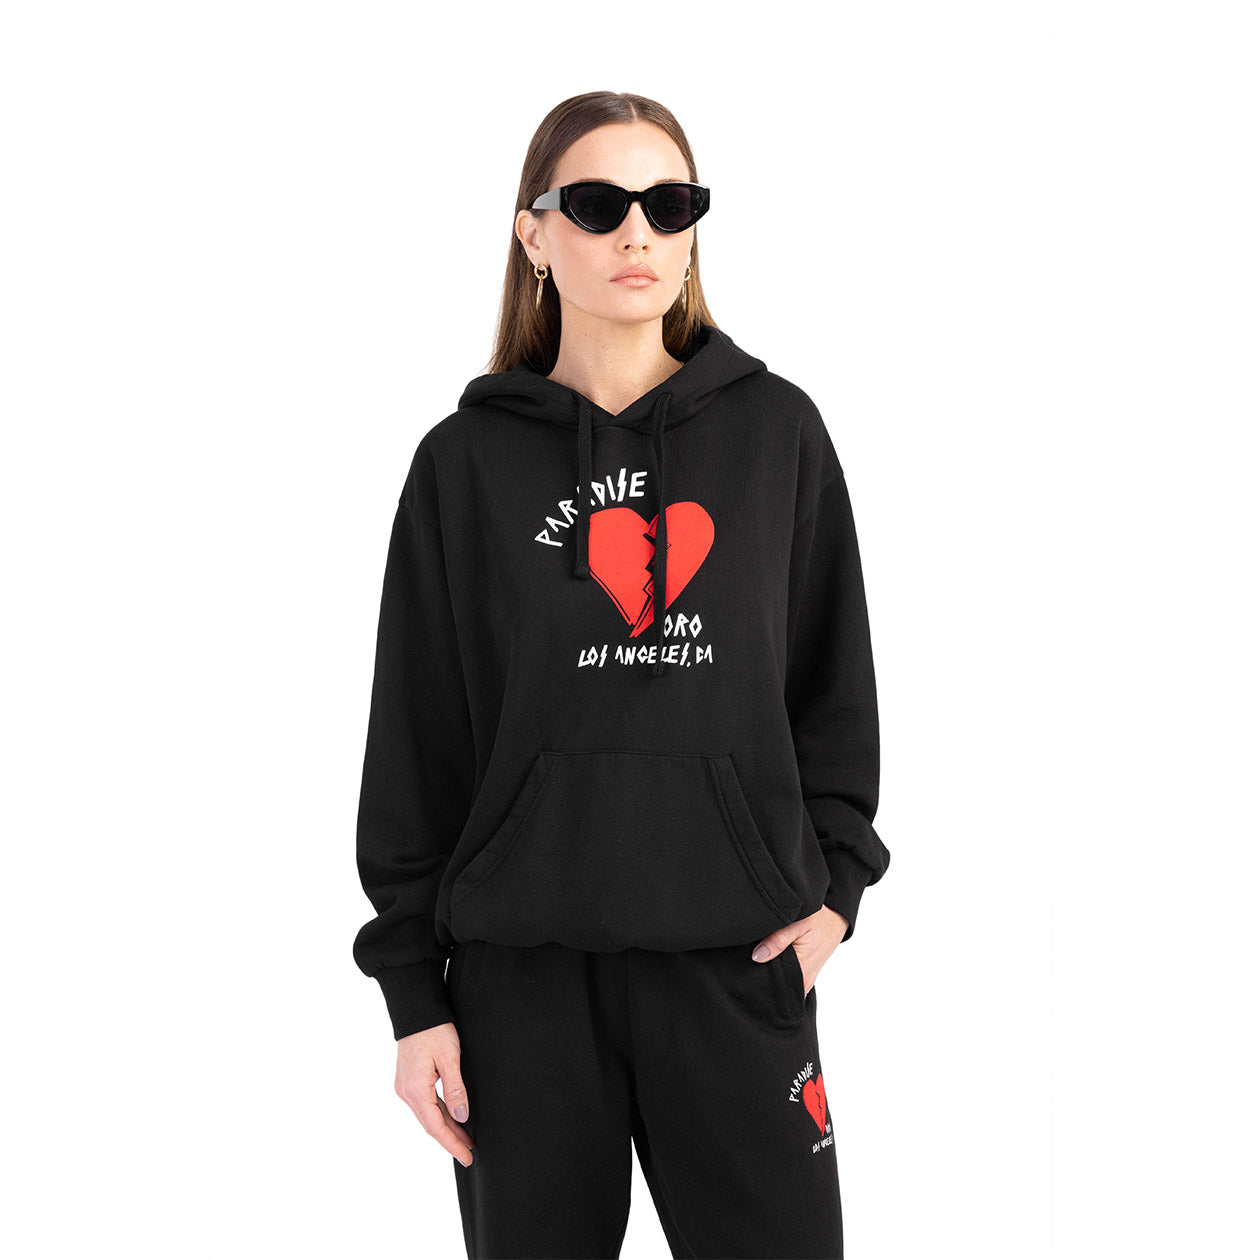 THE PARADISE HEART HOODIE